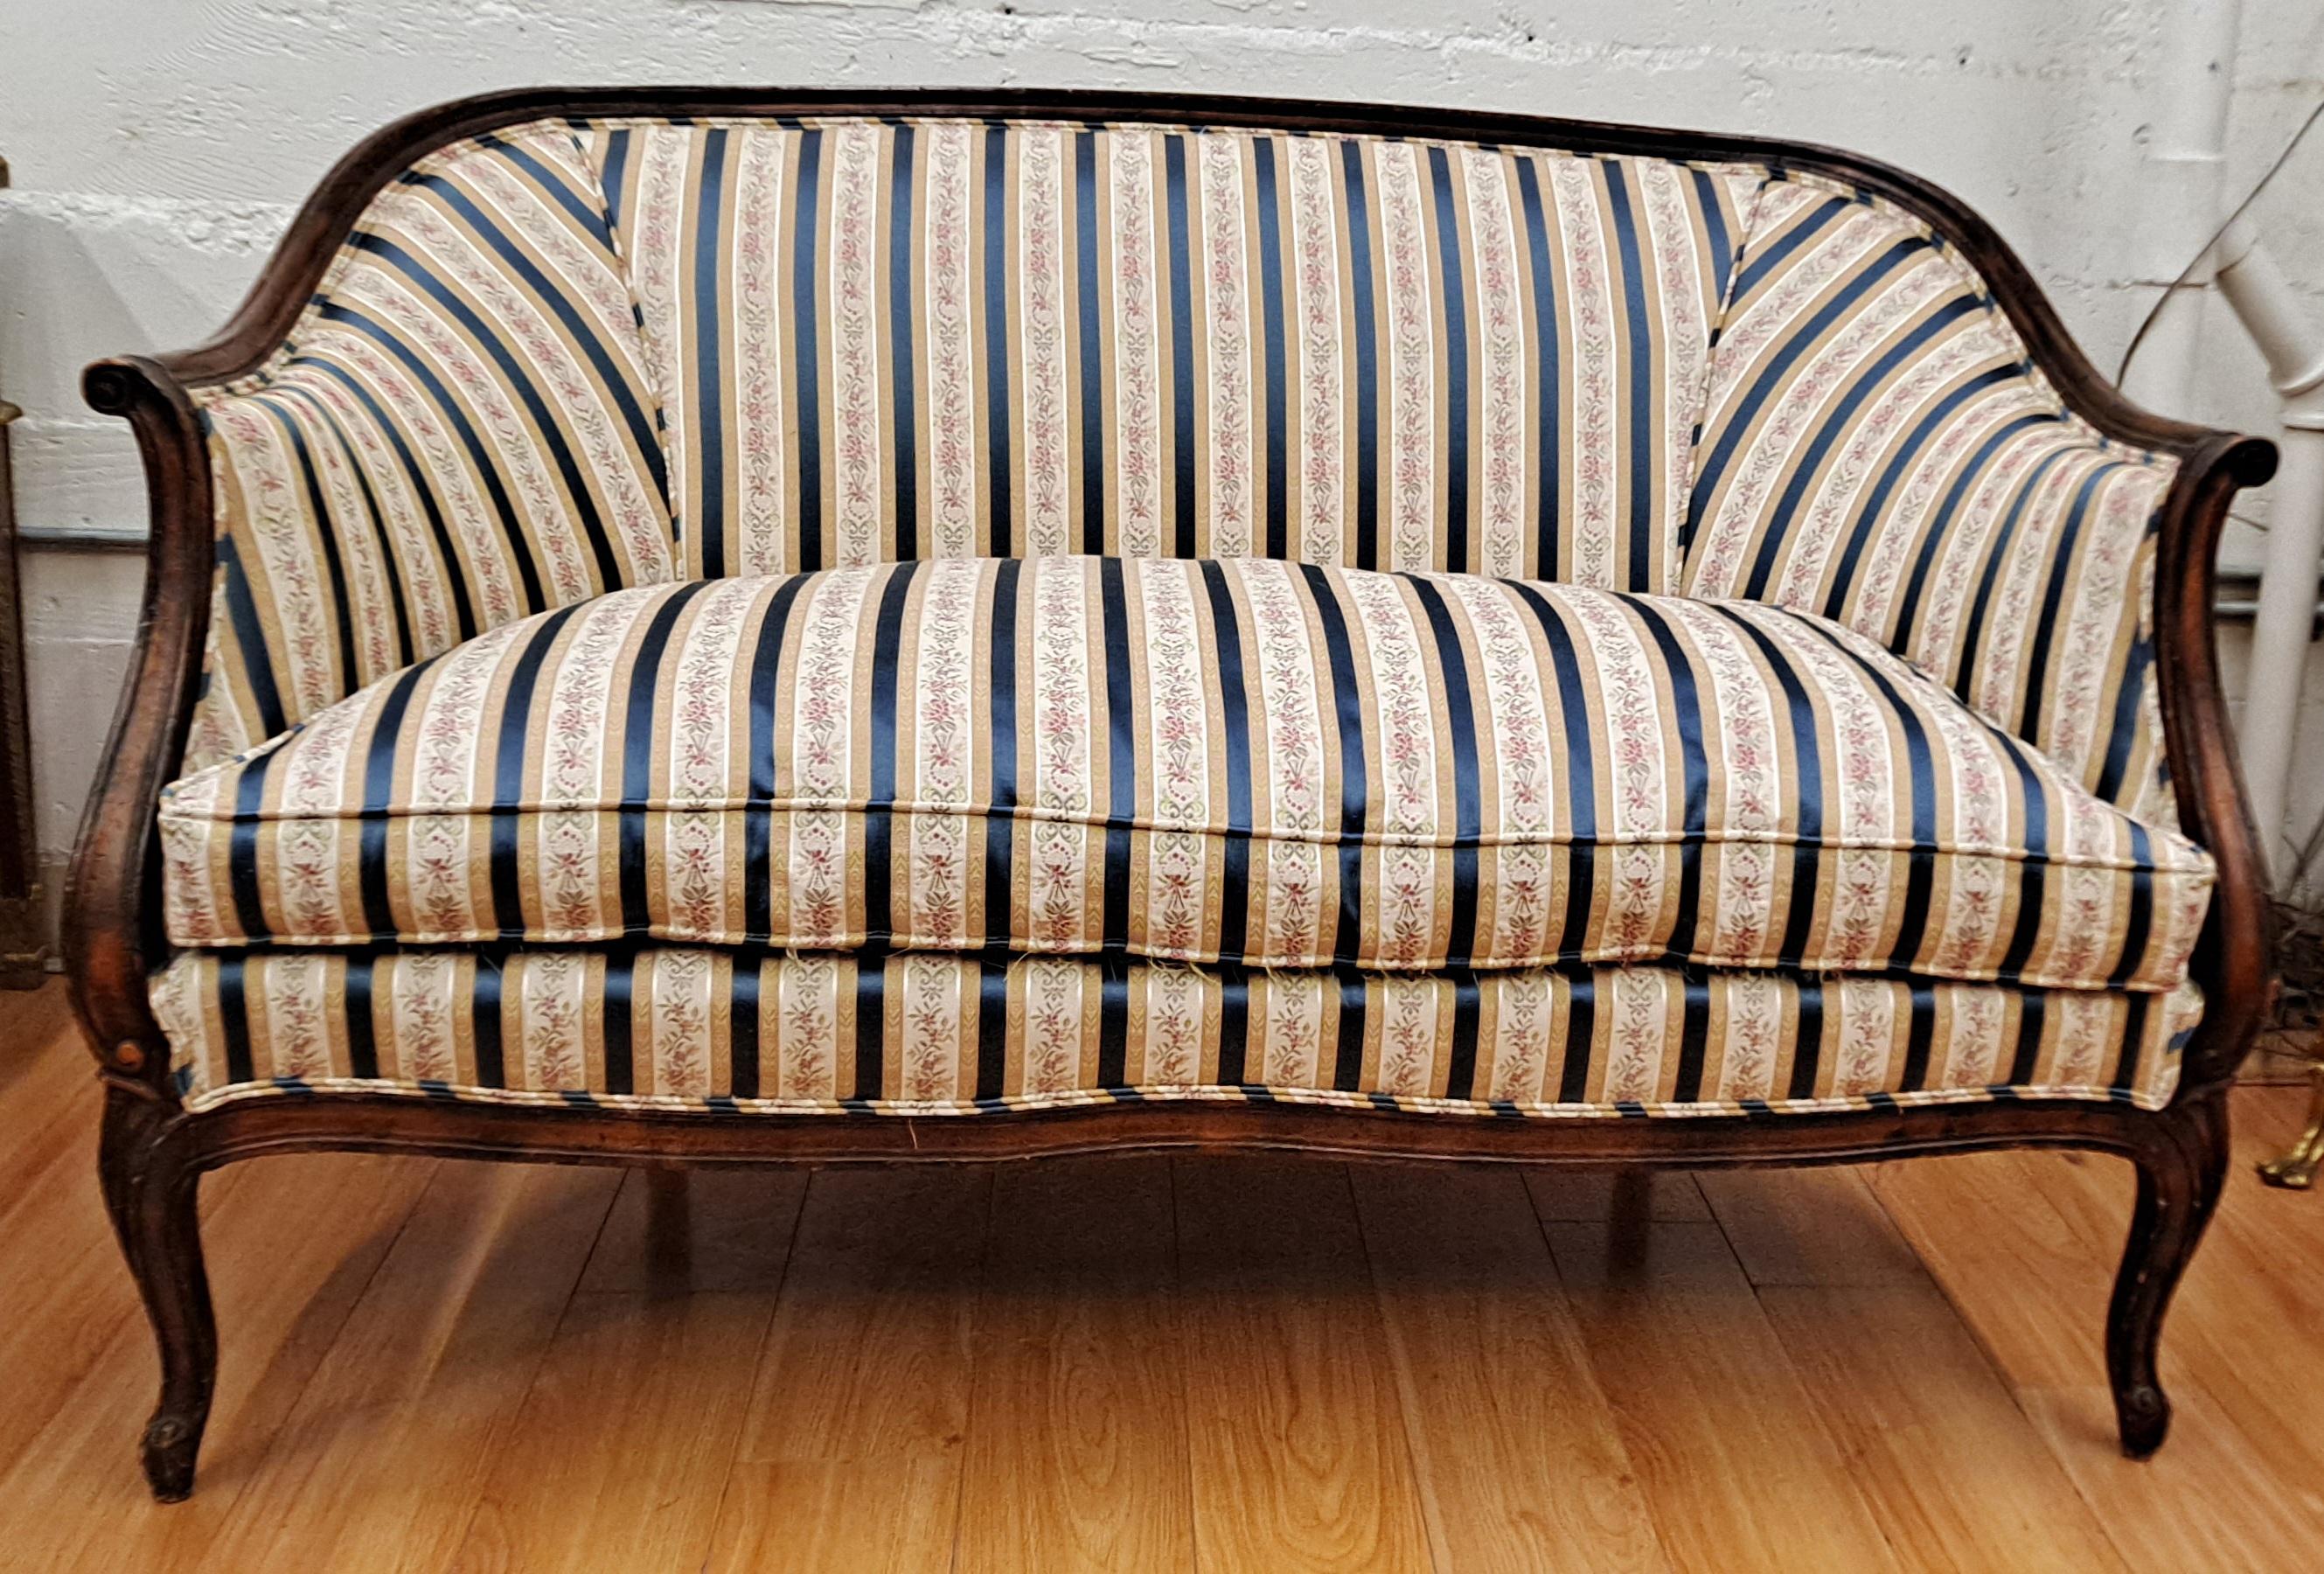 Early 20th Century French Provincial Style Sofa

51